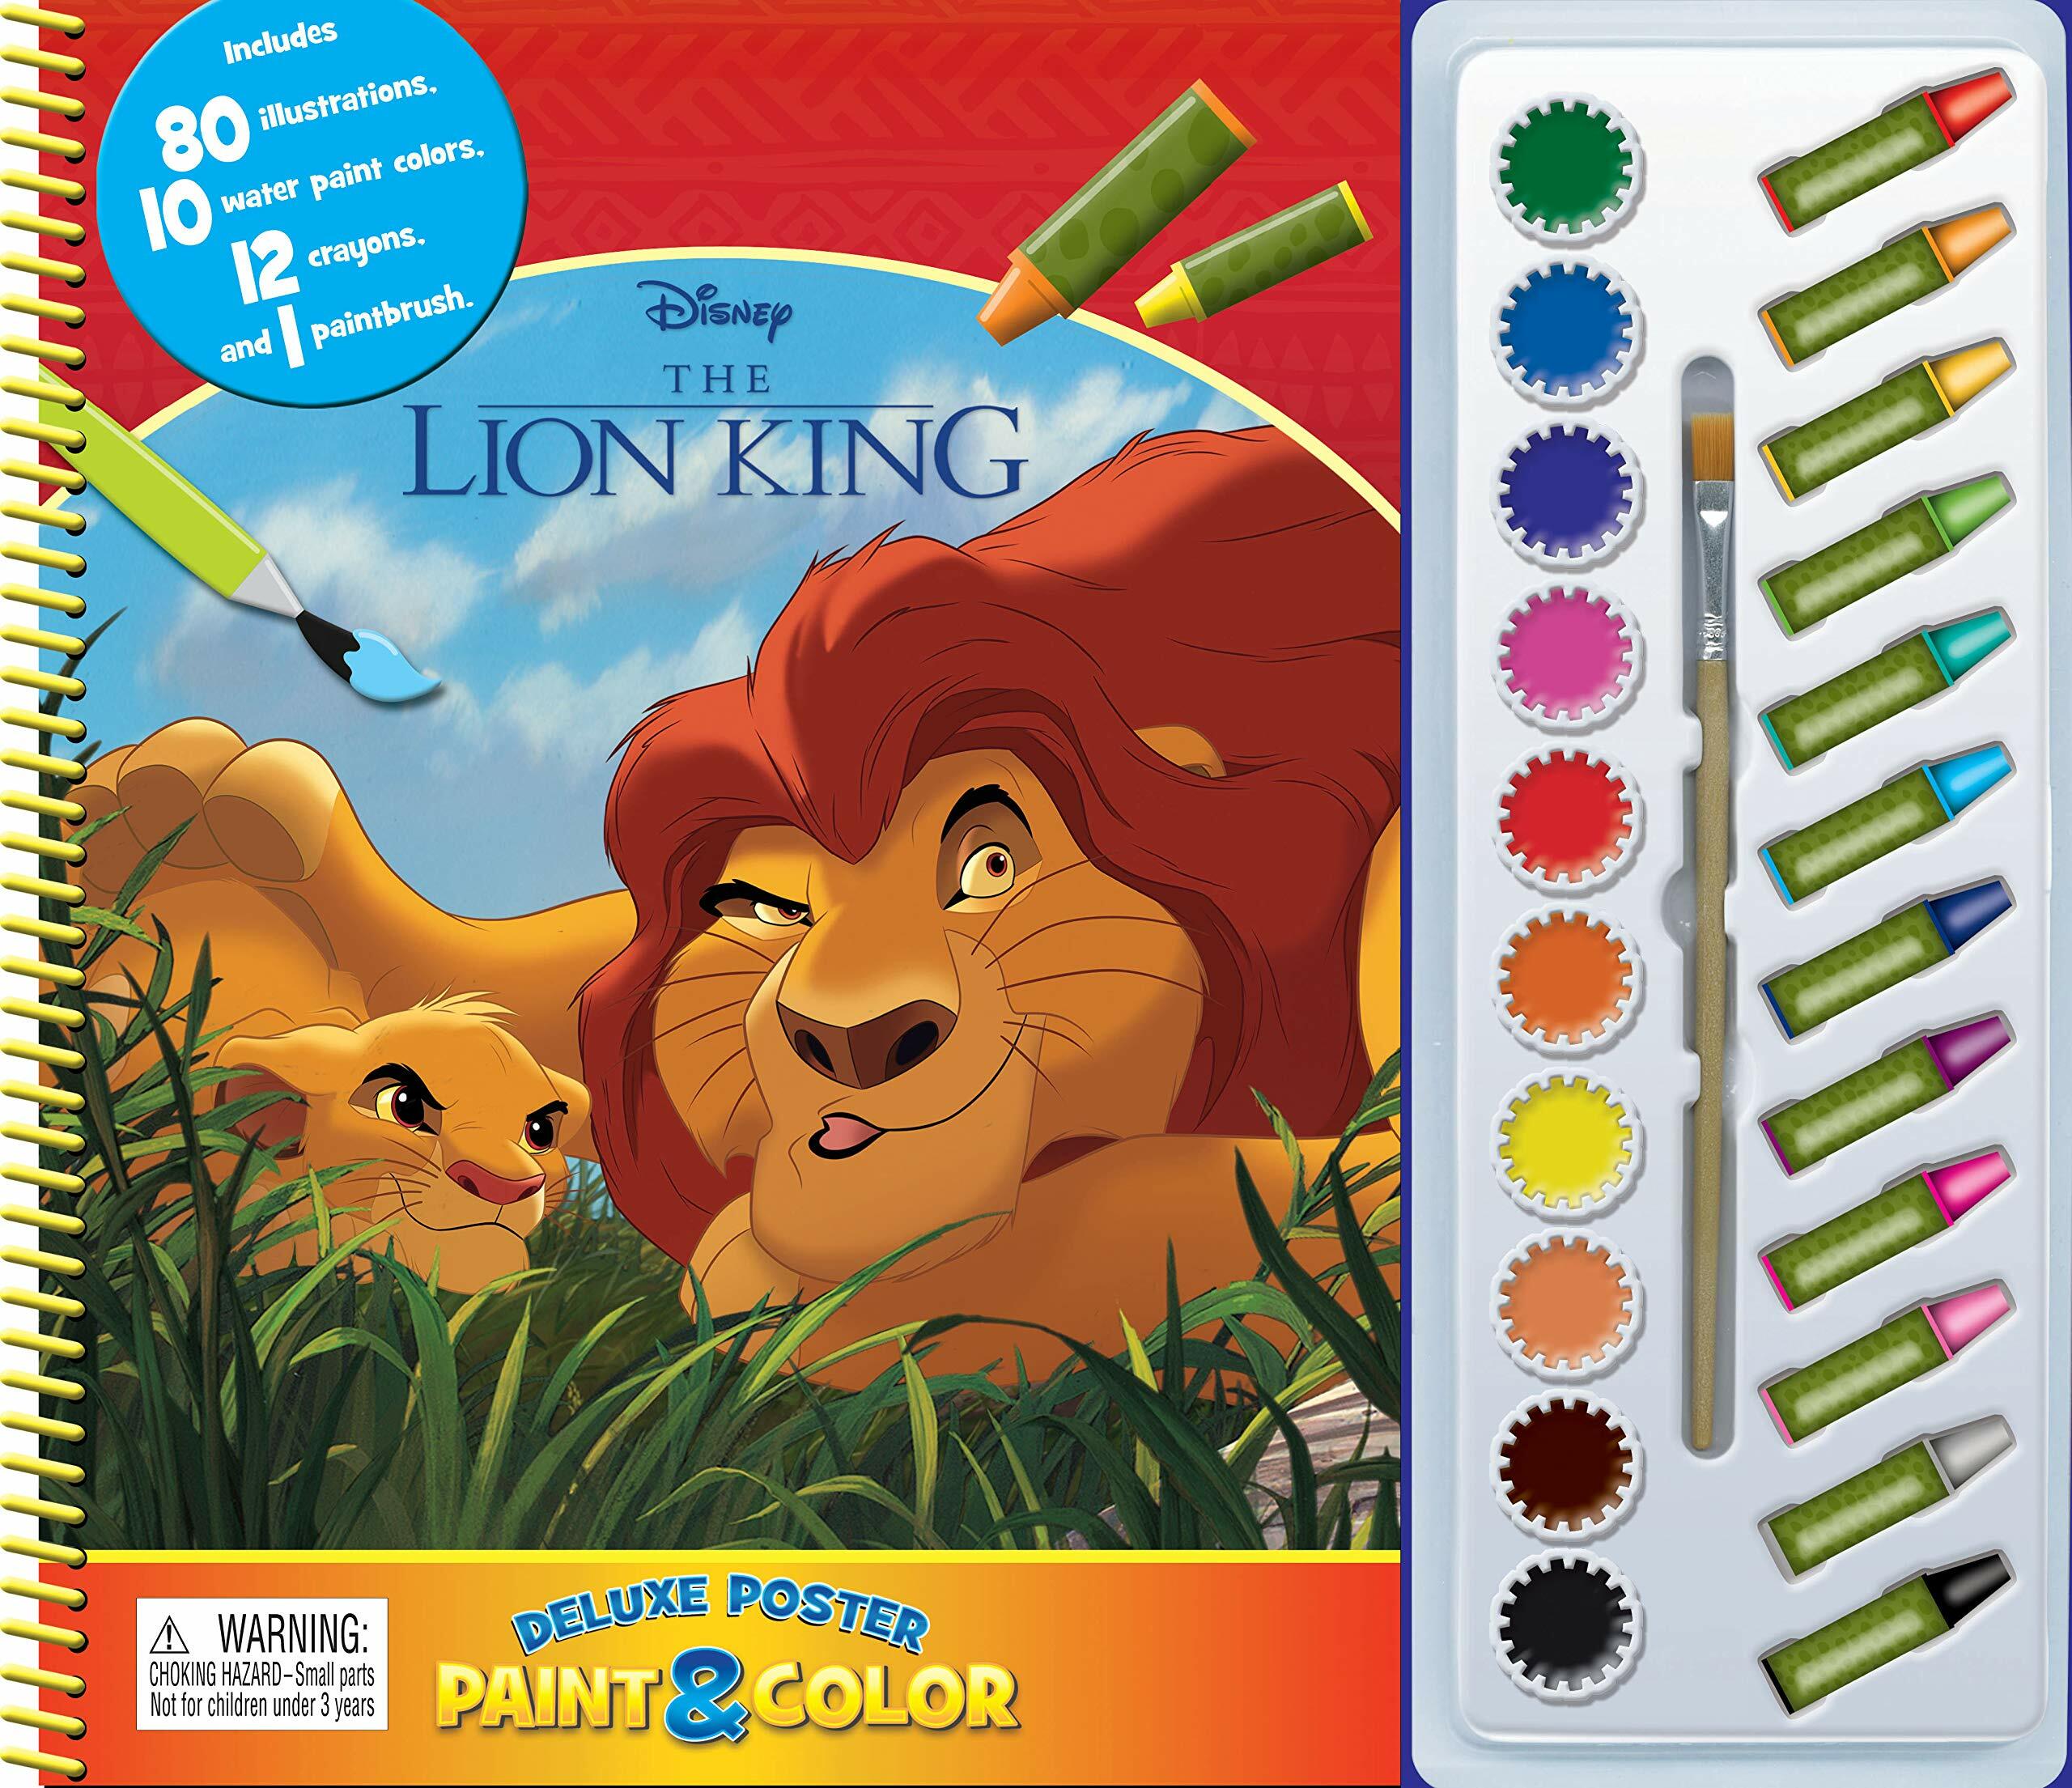 Disney The Lion King Deluxe Poster Paint & Color (Paperback)